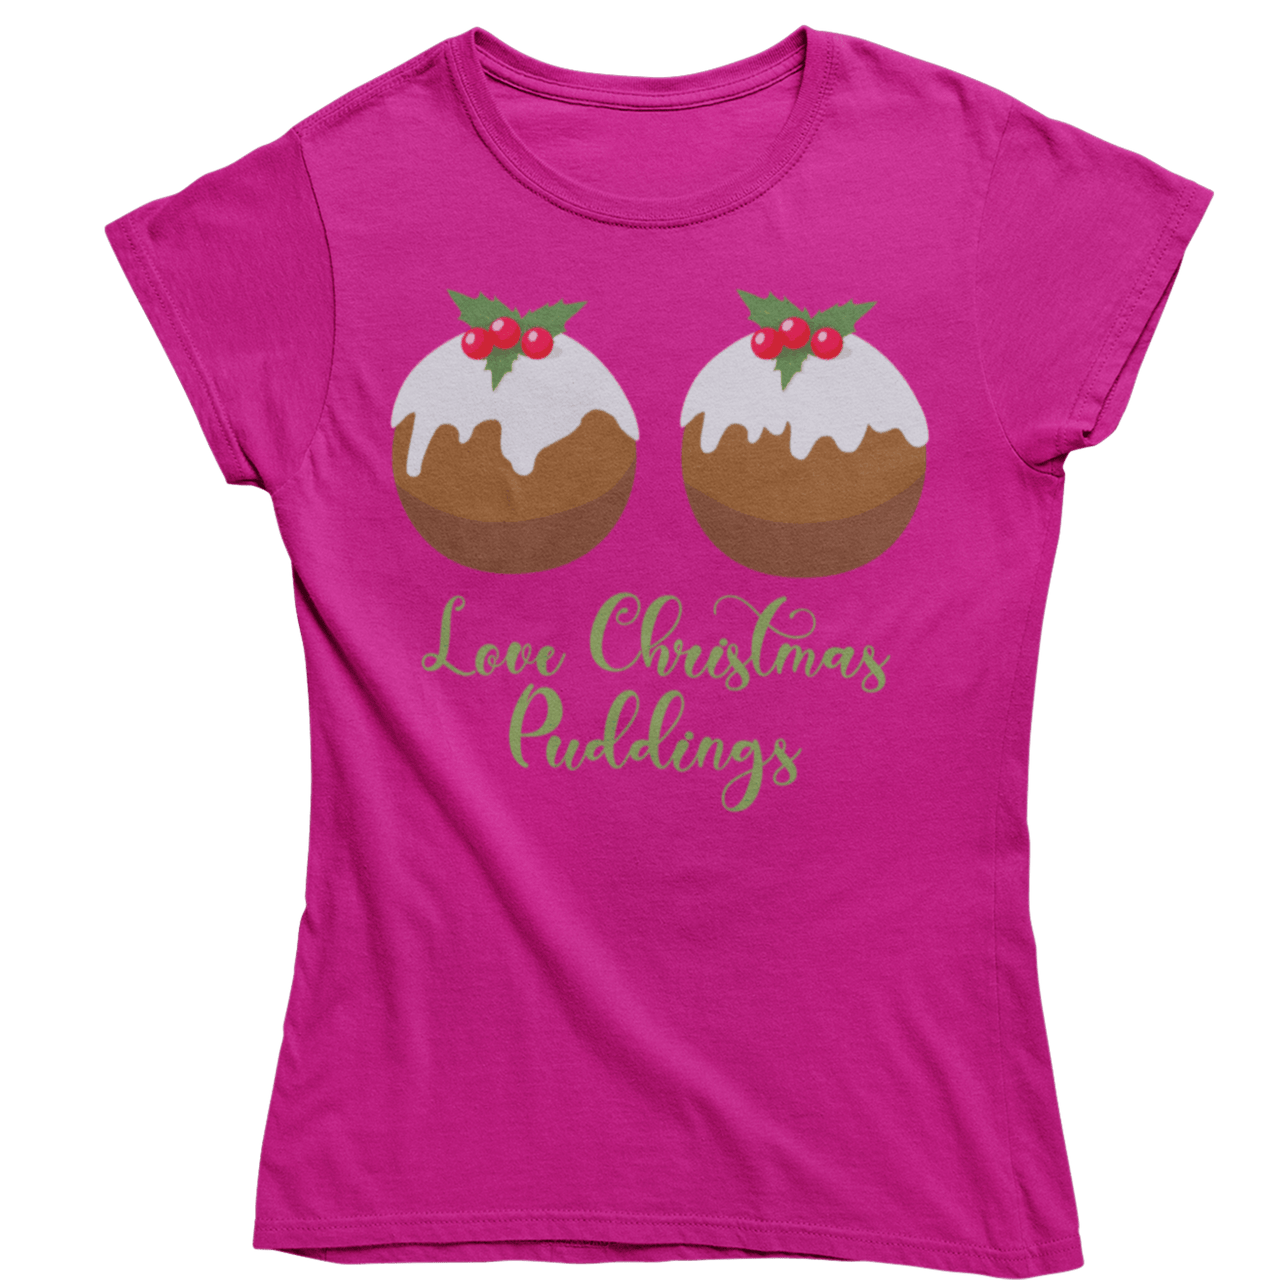 Love Christmas Puddings Fitted Womens T-Shirt 8Ball